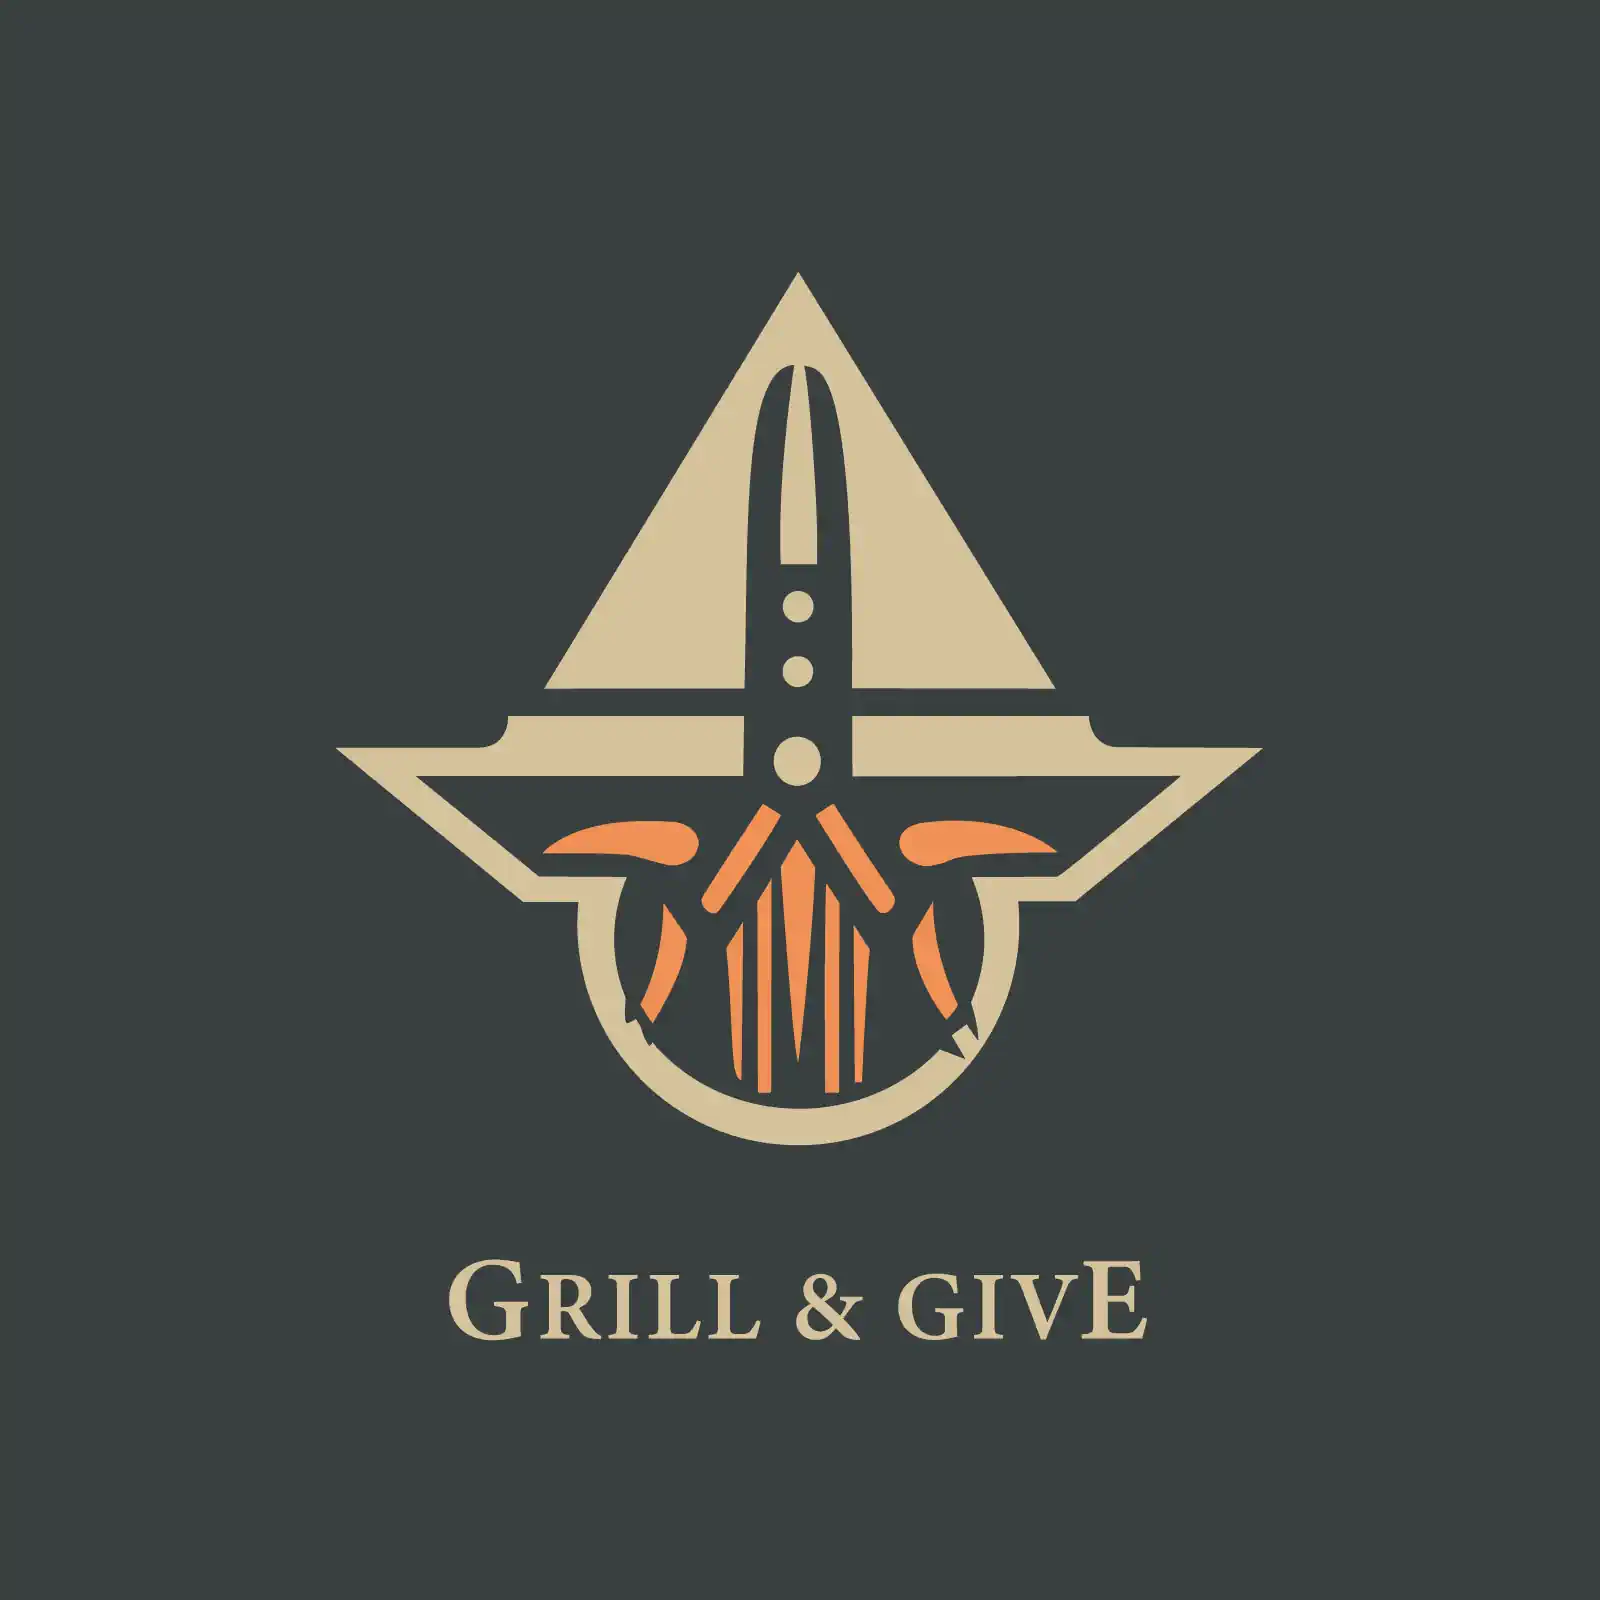 Grill and give logo